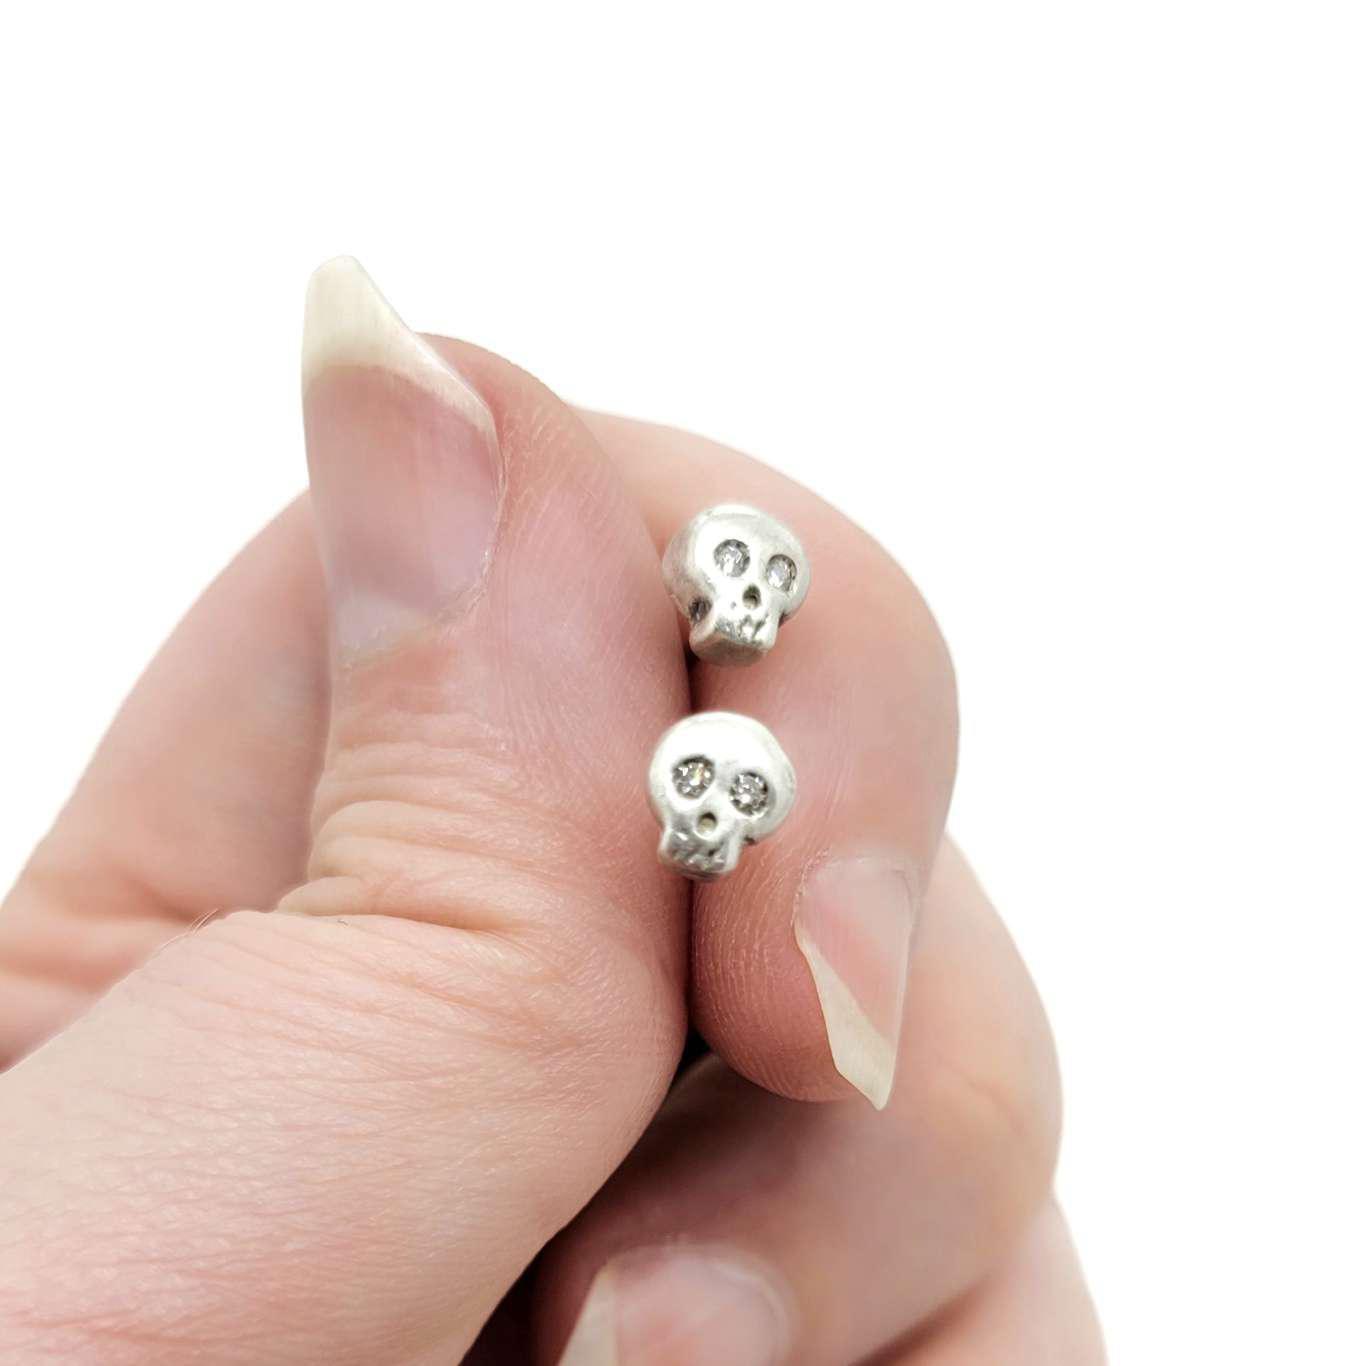 Earrings - Diamond-Eyed Tiny Skull Studs in Sterling Silver by Michelle Chang